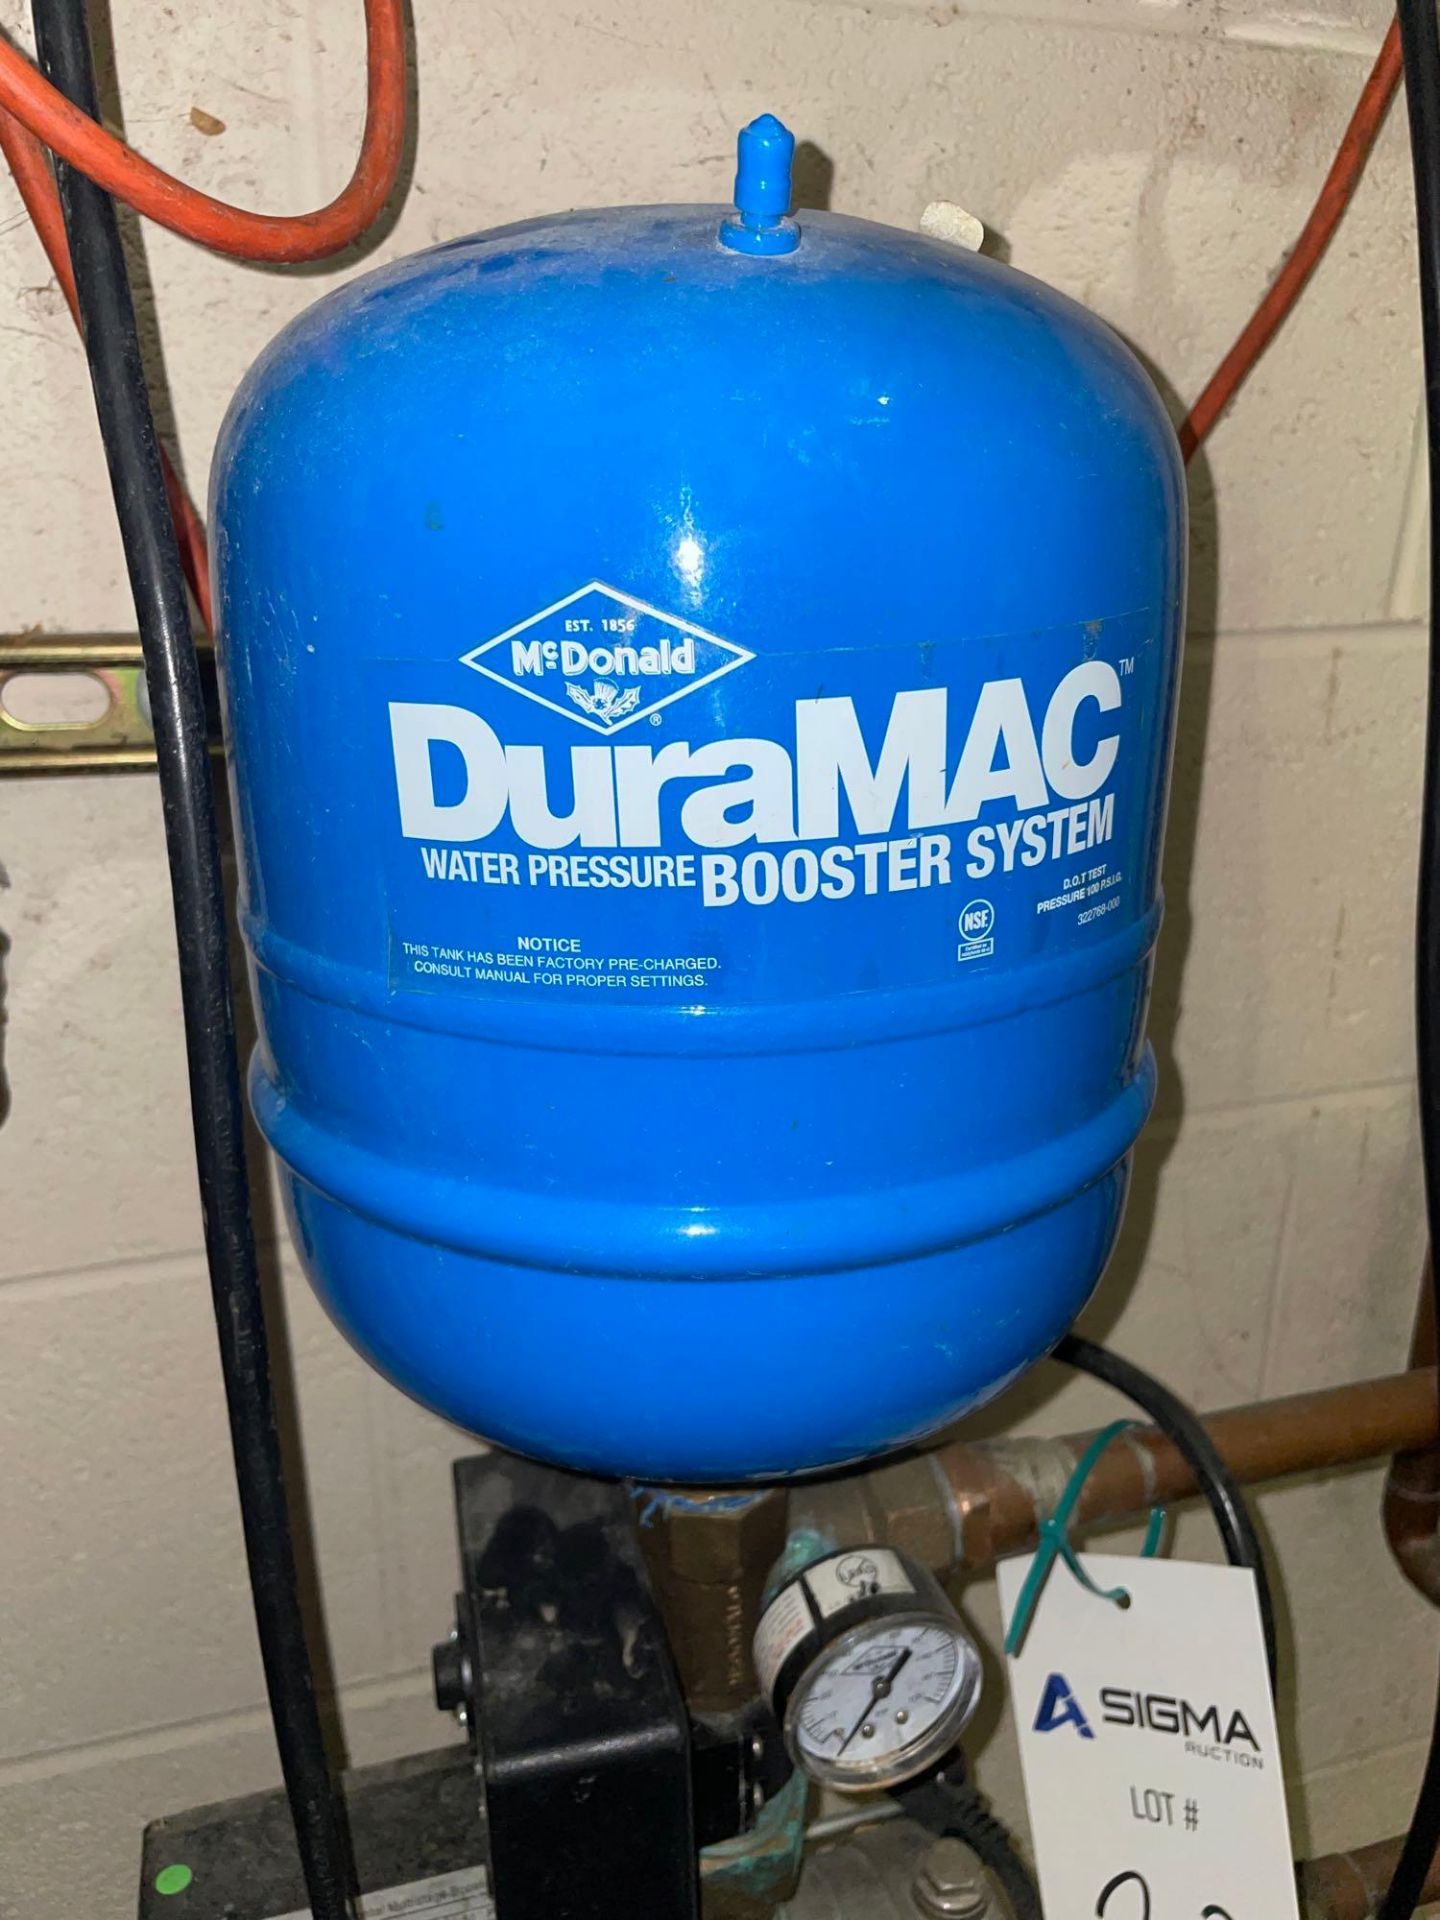 DuraMAC Booster System - Image 3 of 4